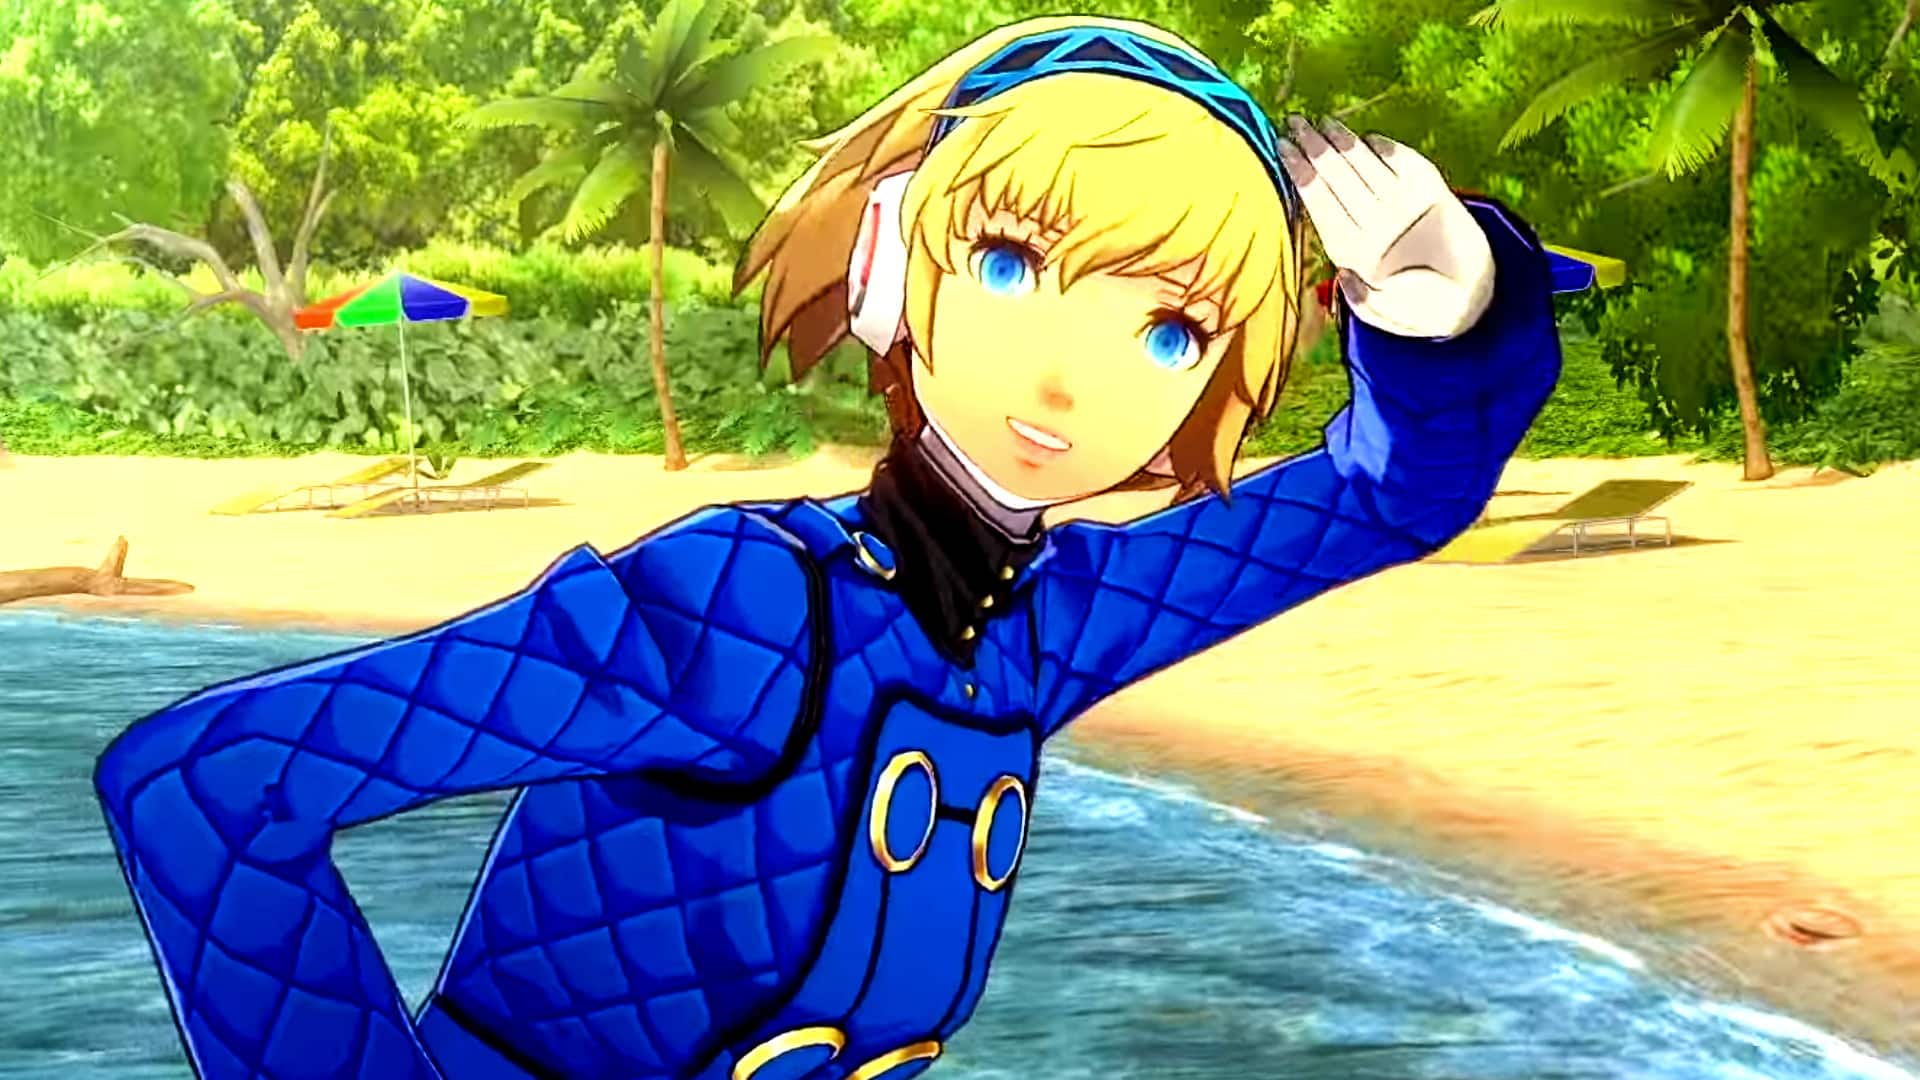 P3RE' Domain Update Suggests Persona 3 Remake Announcement is Coming -  Insider Gaming